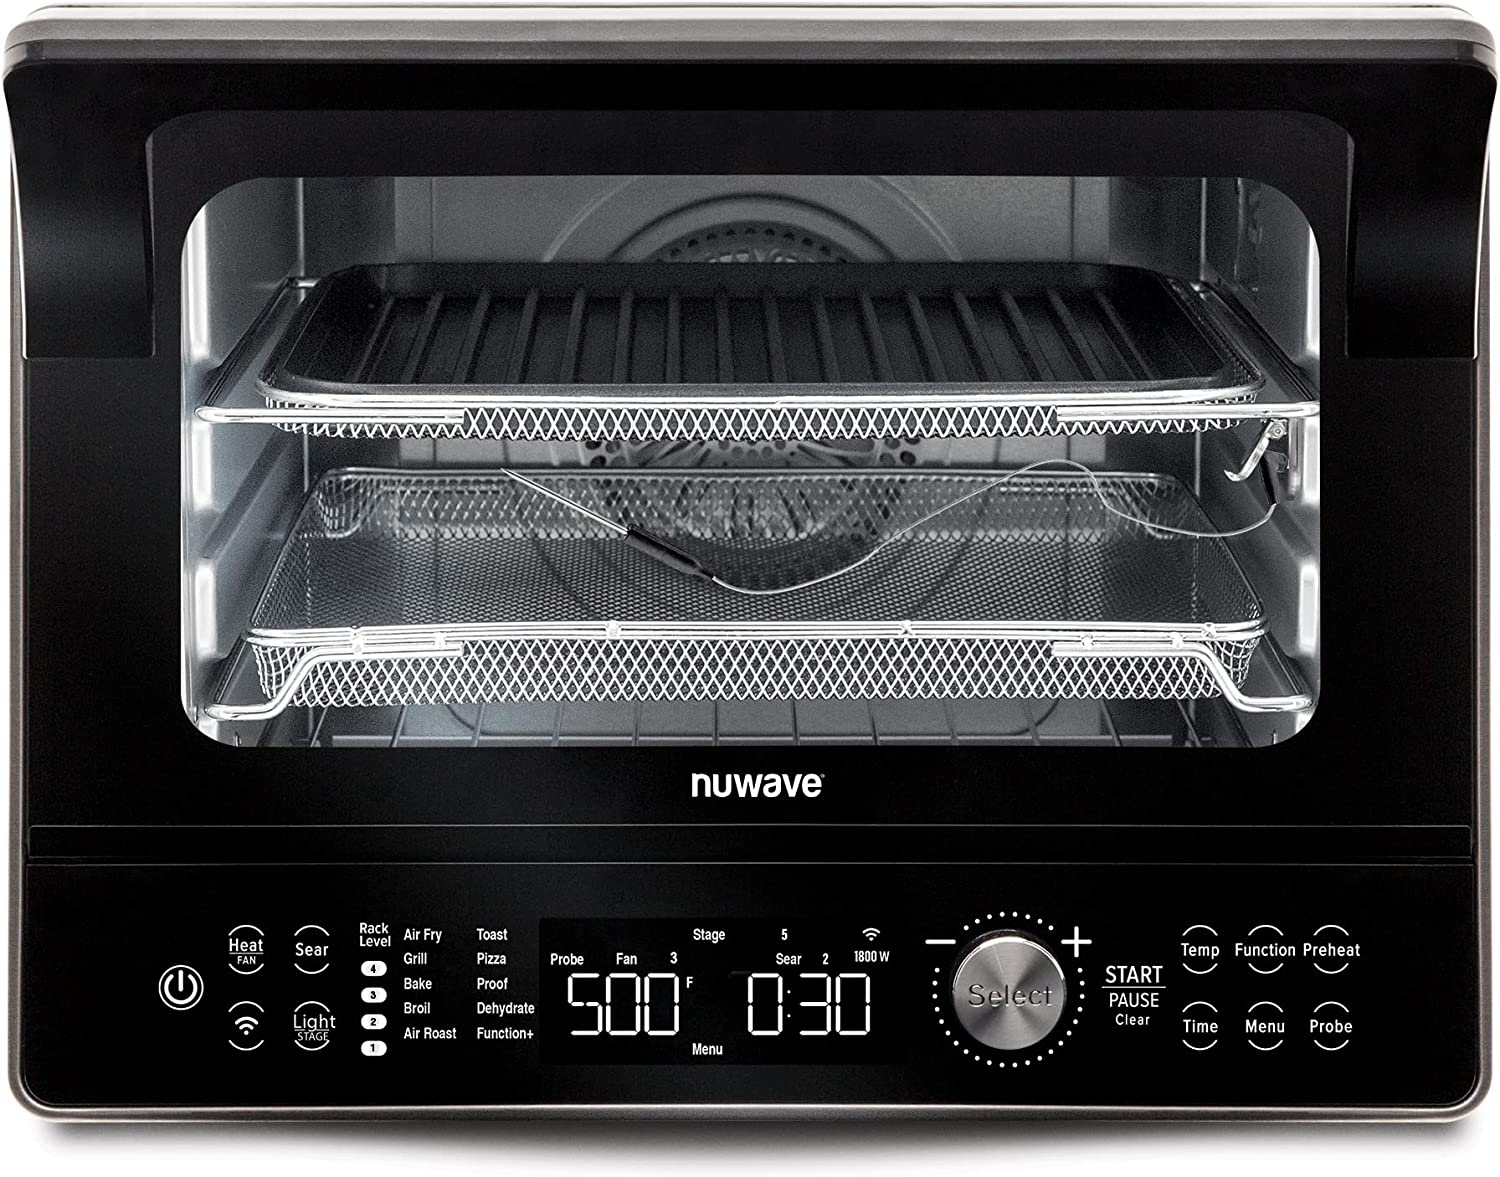 NuWave TODD ENGLISH iQ360 Digital Smart Oven, 20-in-1 Convection Infrared Grill Griddle Combo, 34-Qt Mega Capacity, 1800 Watts,